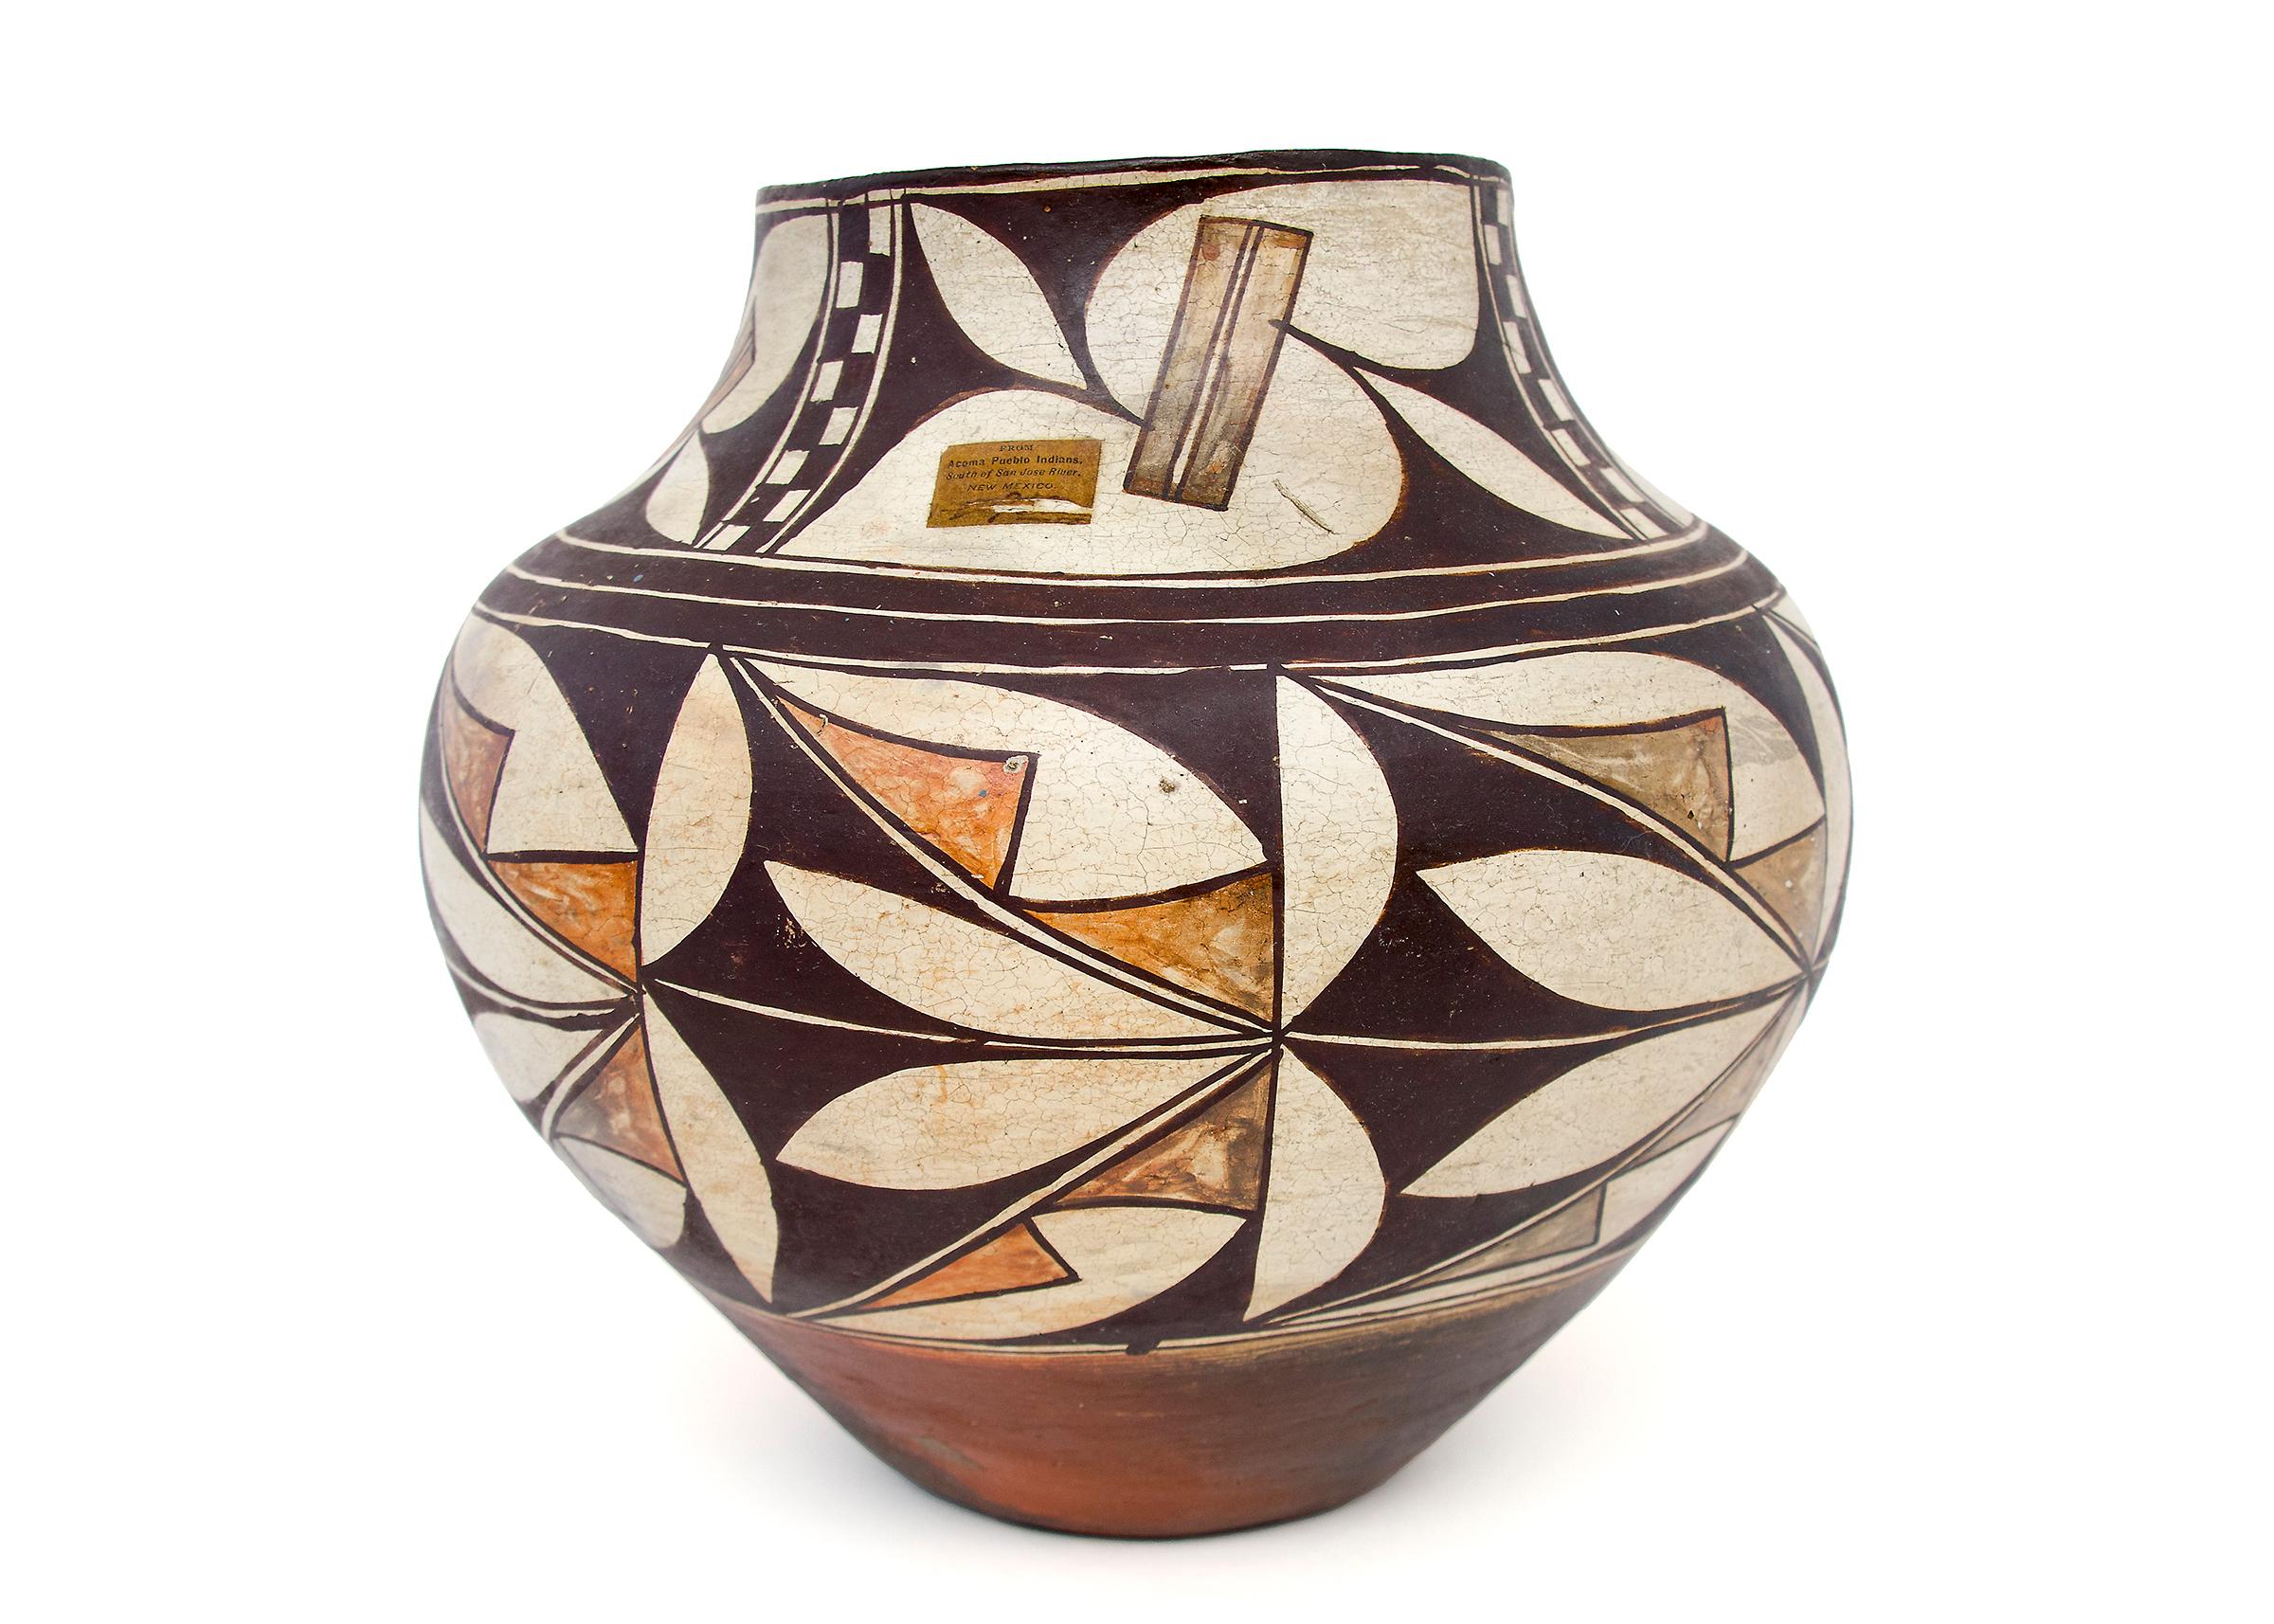 Acoma Olla (storage jar), Polychrome with abstract foliate motif. Earthenware with slip glazes, dimensions measure 11 ½ inches tall and 11 inches diameter.

An earthenware Jar constructed by hand and painted with slip glazes in an intricate design